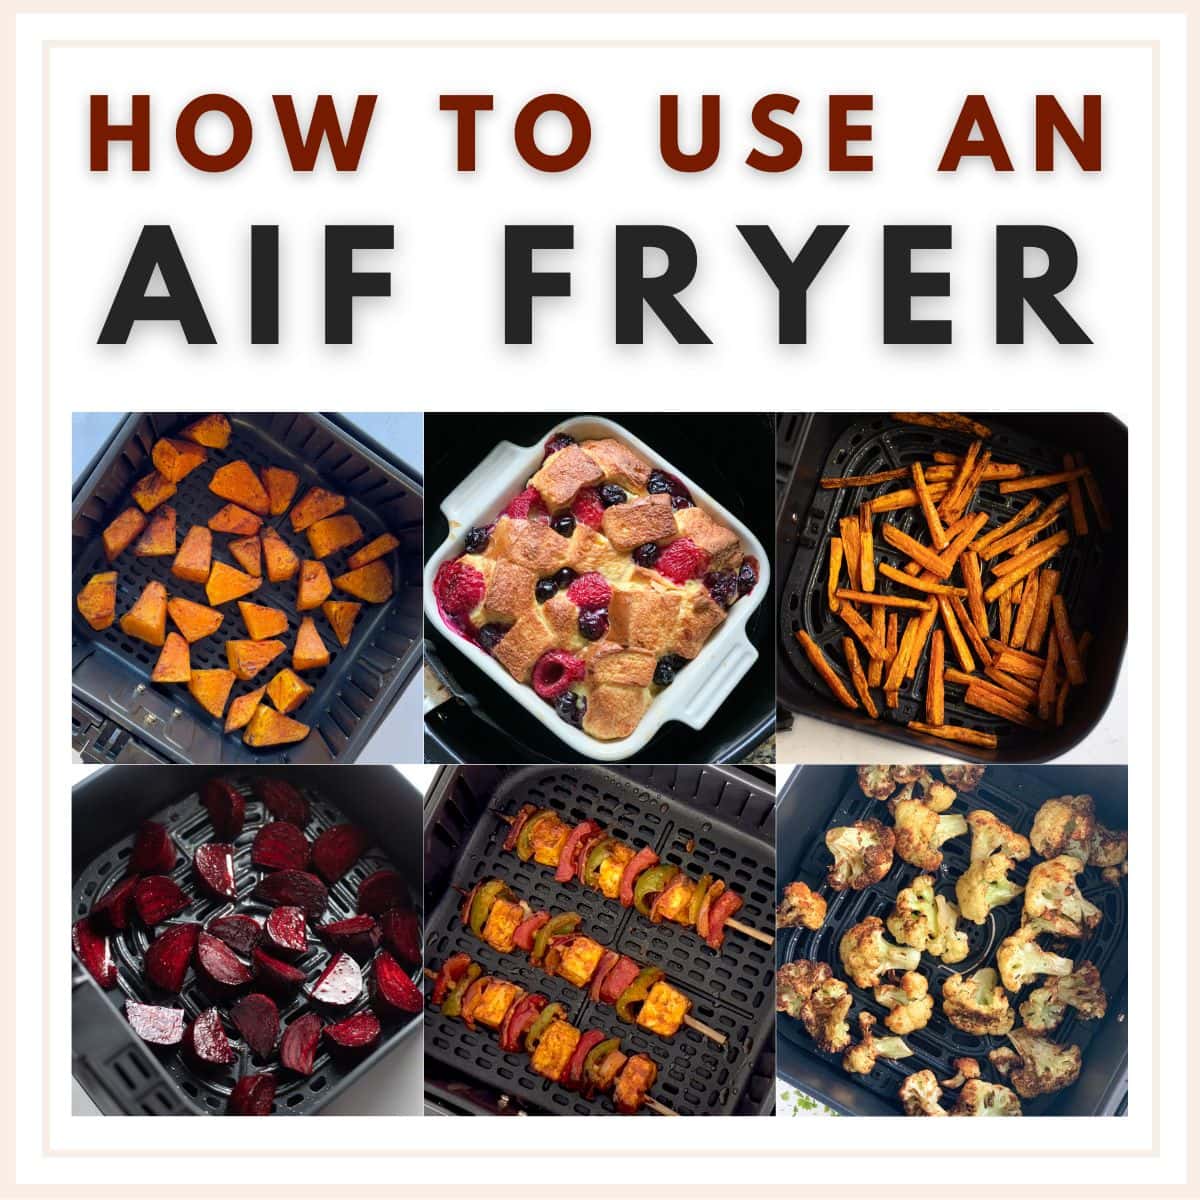 Is using parchment paper worth it? I used it for the first time today and i  still have to clean the basket of the air fryer : r/airfryer